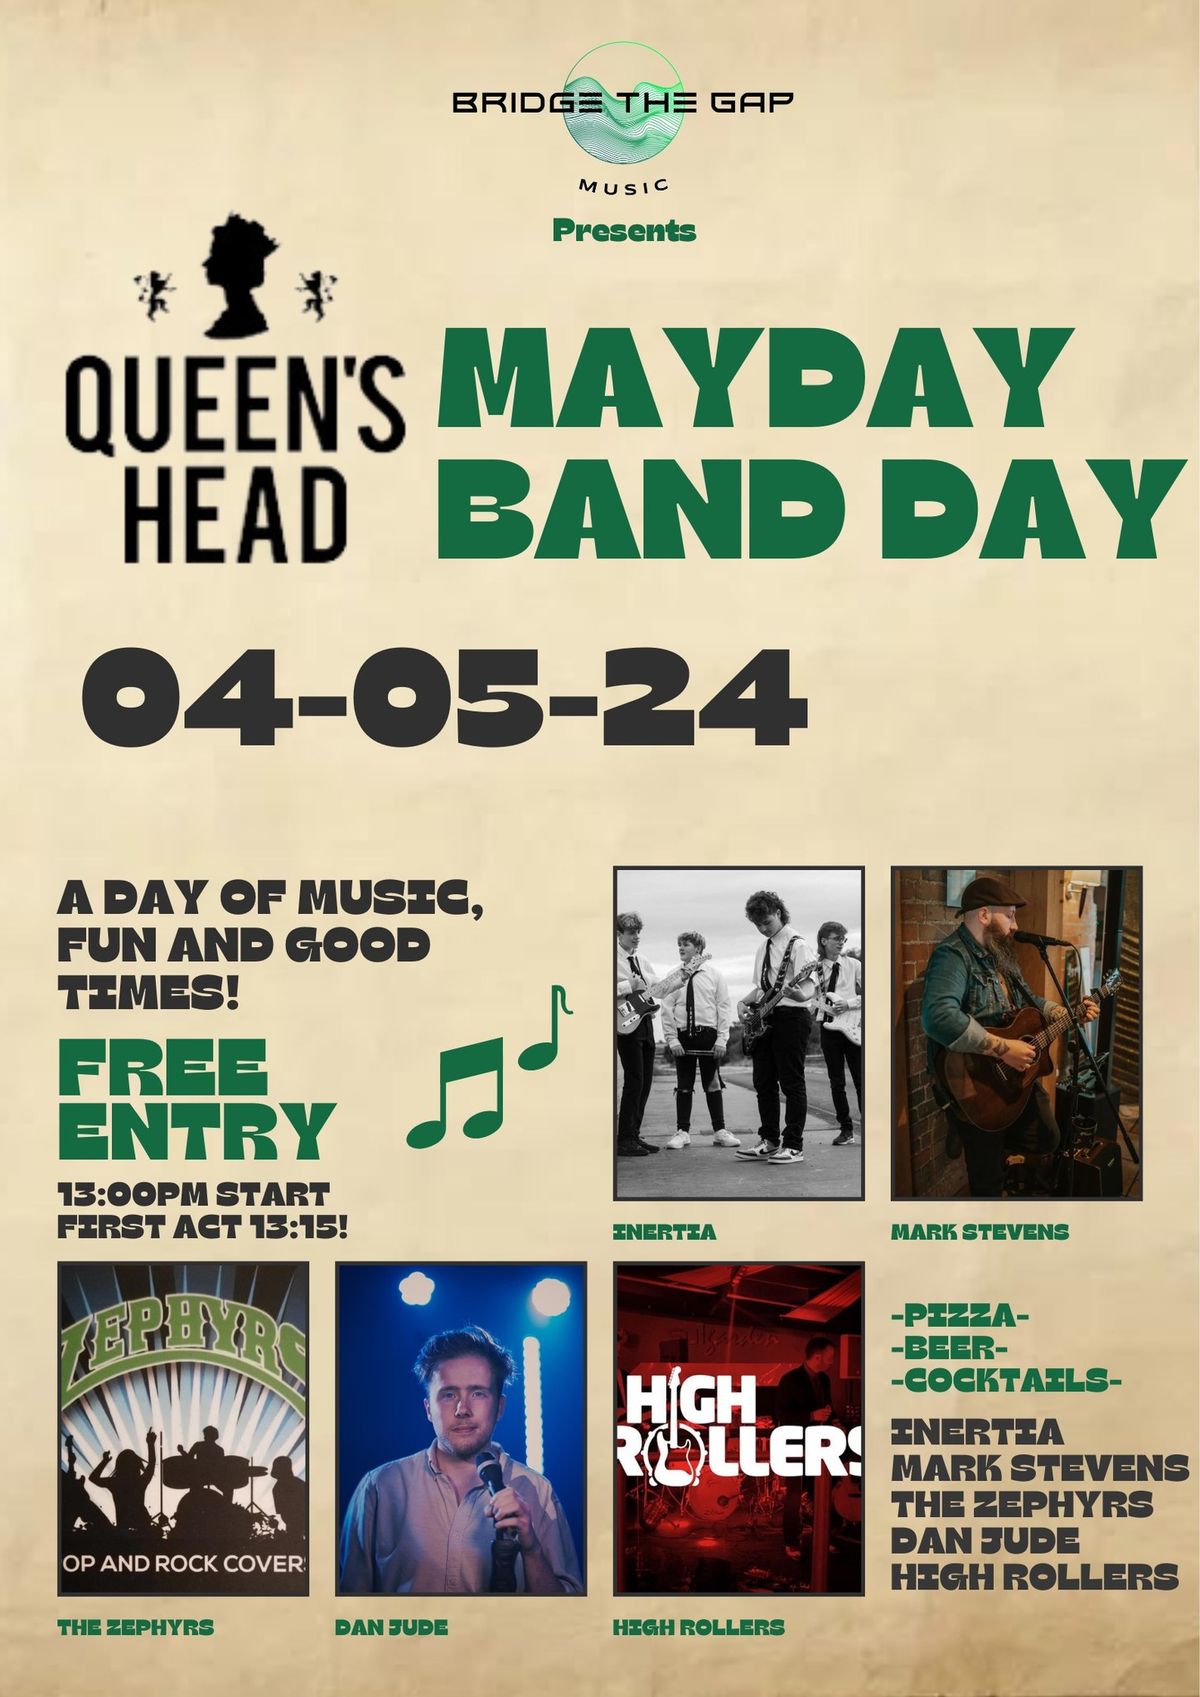 QUEENS HEAD MAYDAY BAND DAY